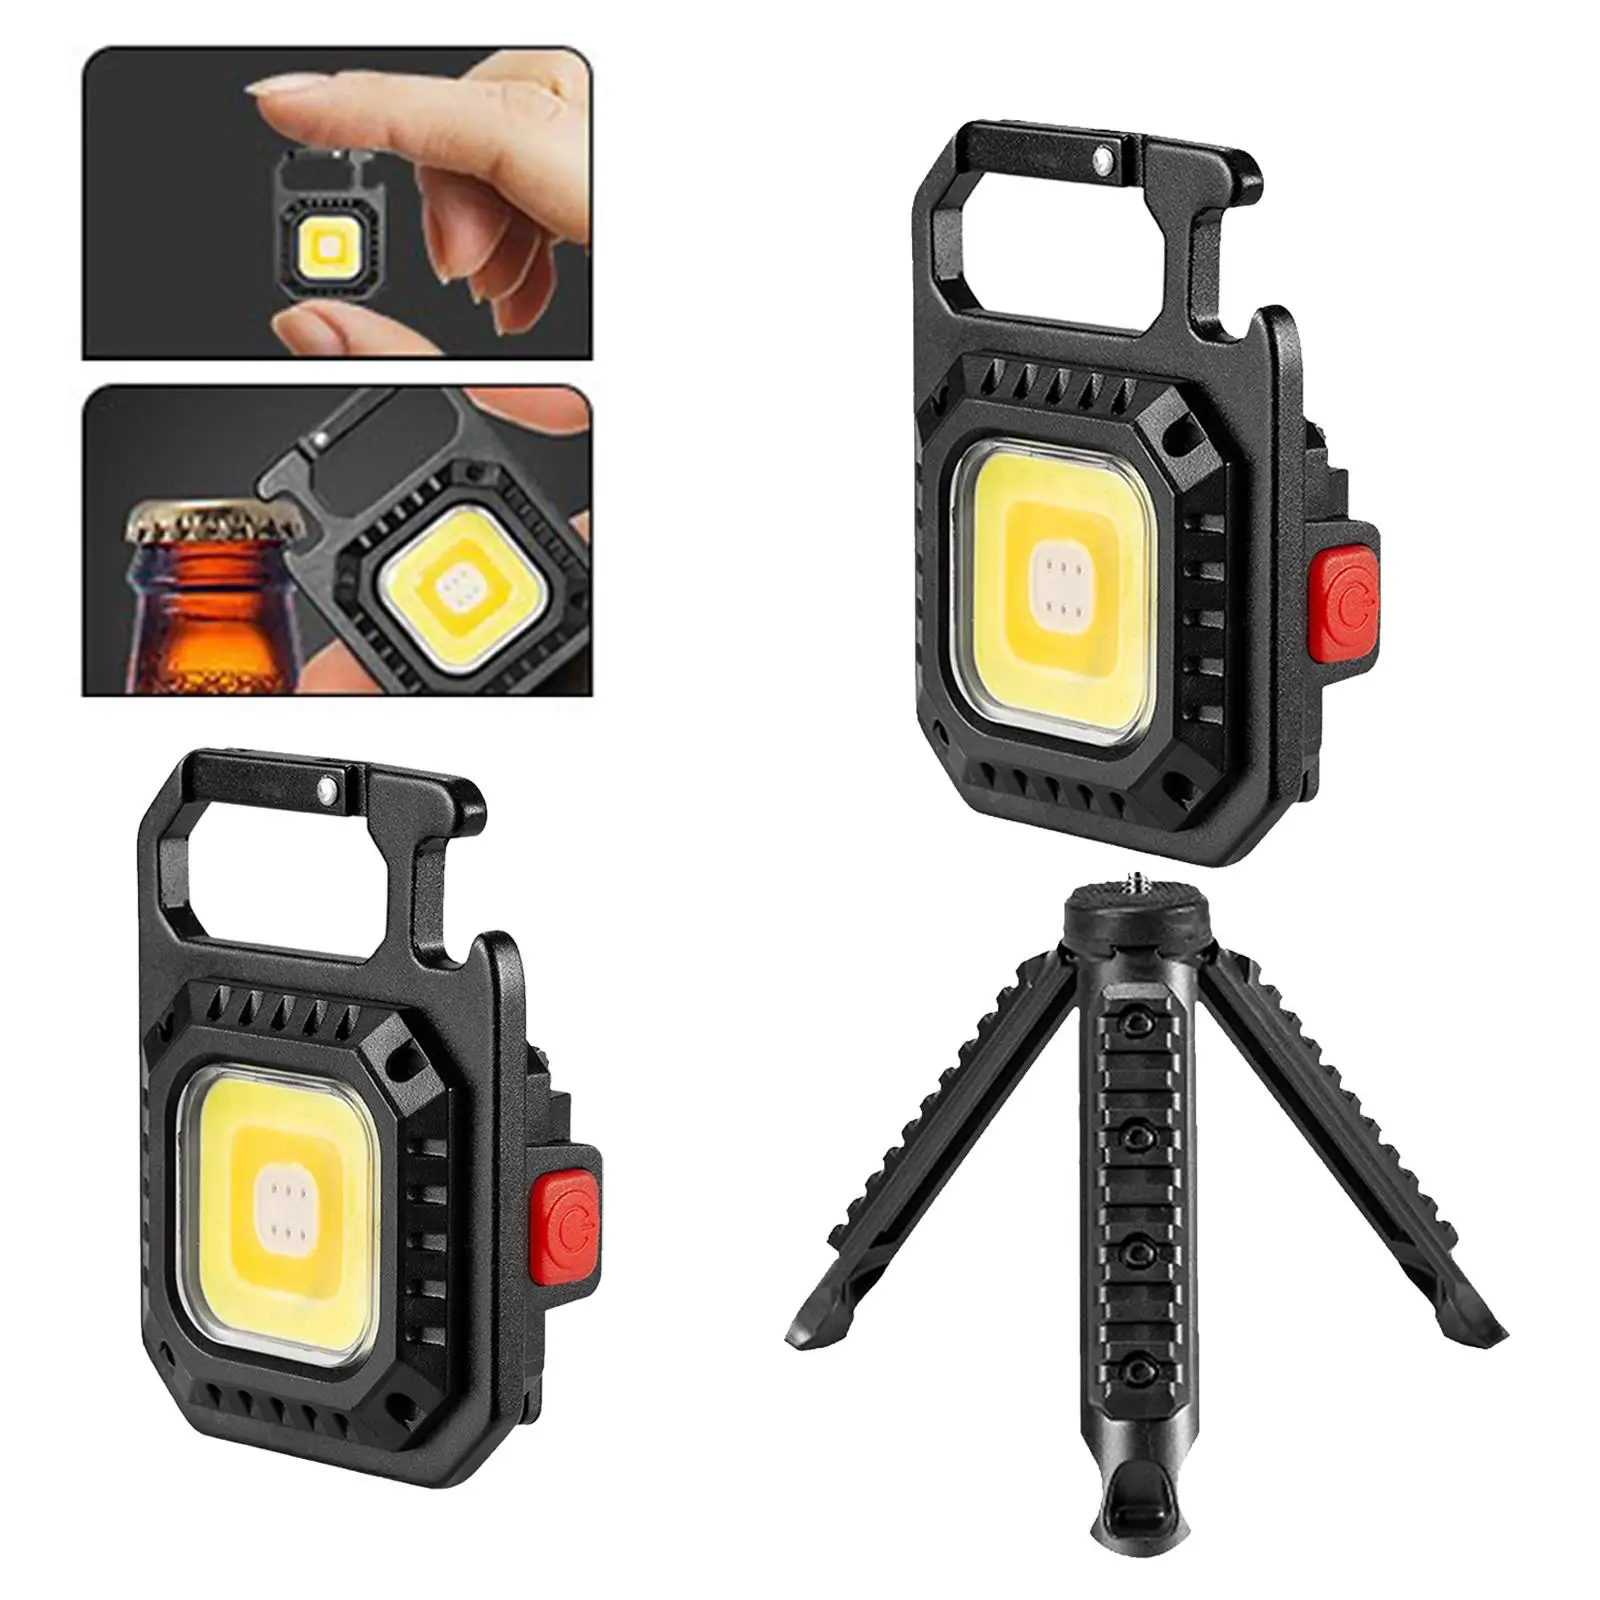 Small COB Flashlight, Rechargeable Keychain led Portable pocket lamp for Bottle Opener and  Base for Fishing, Walking&Camping